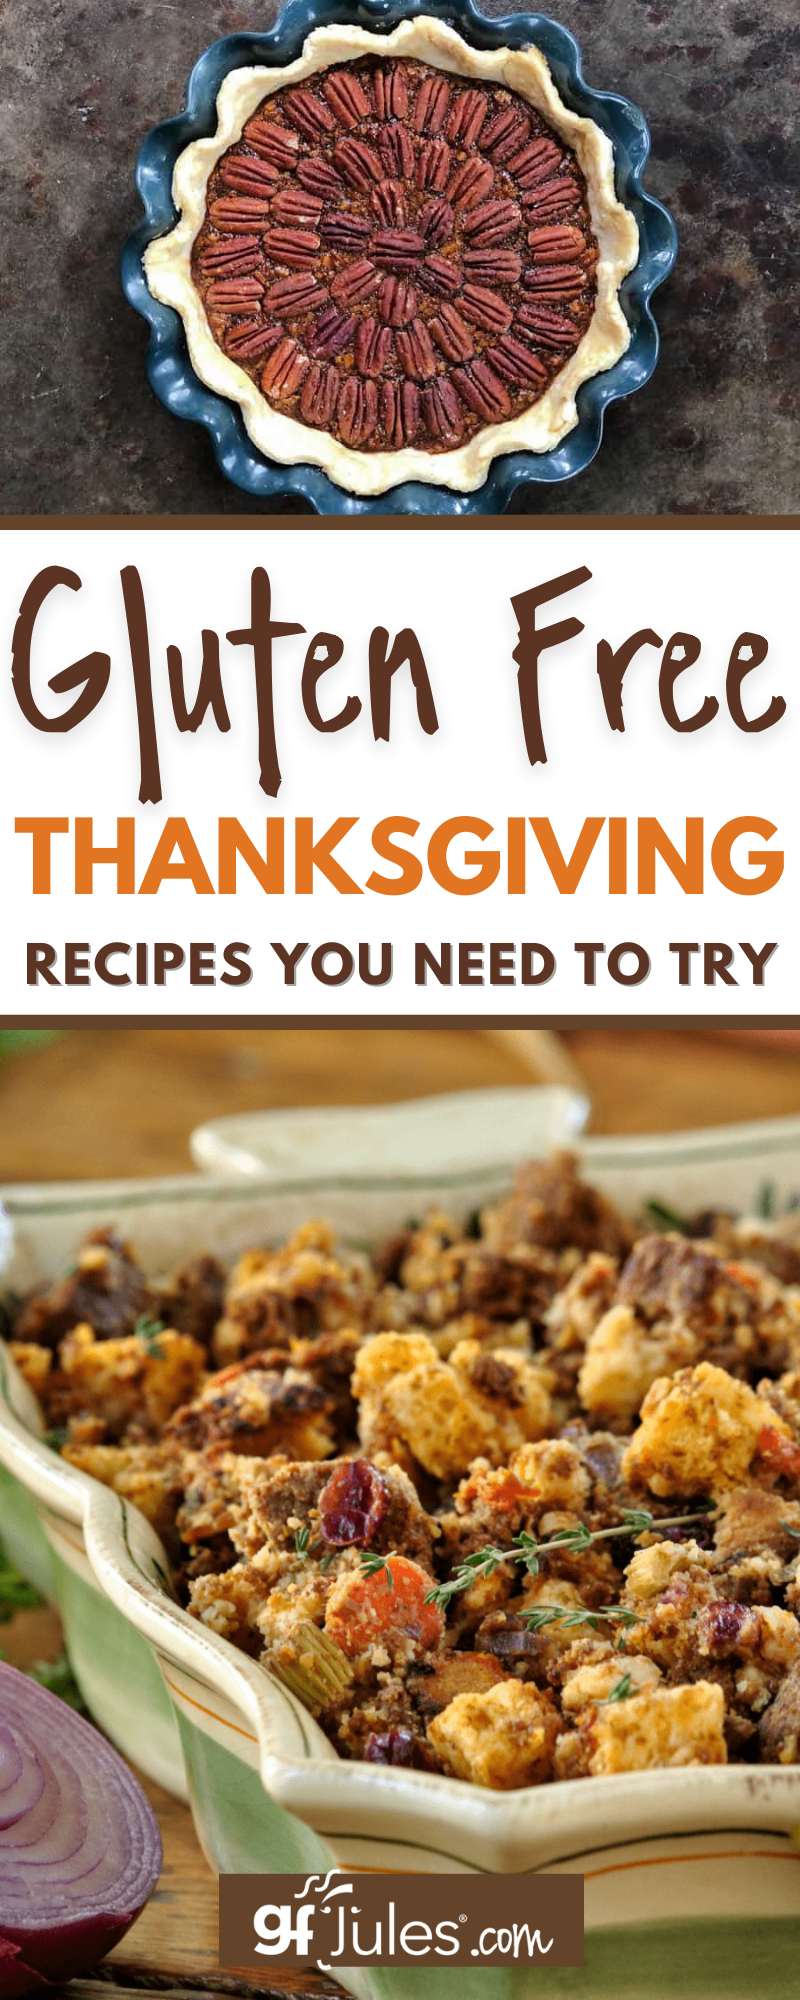 Gluten Free Thanksgiving Recipes You Need To Try